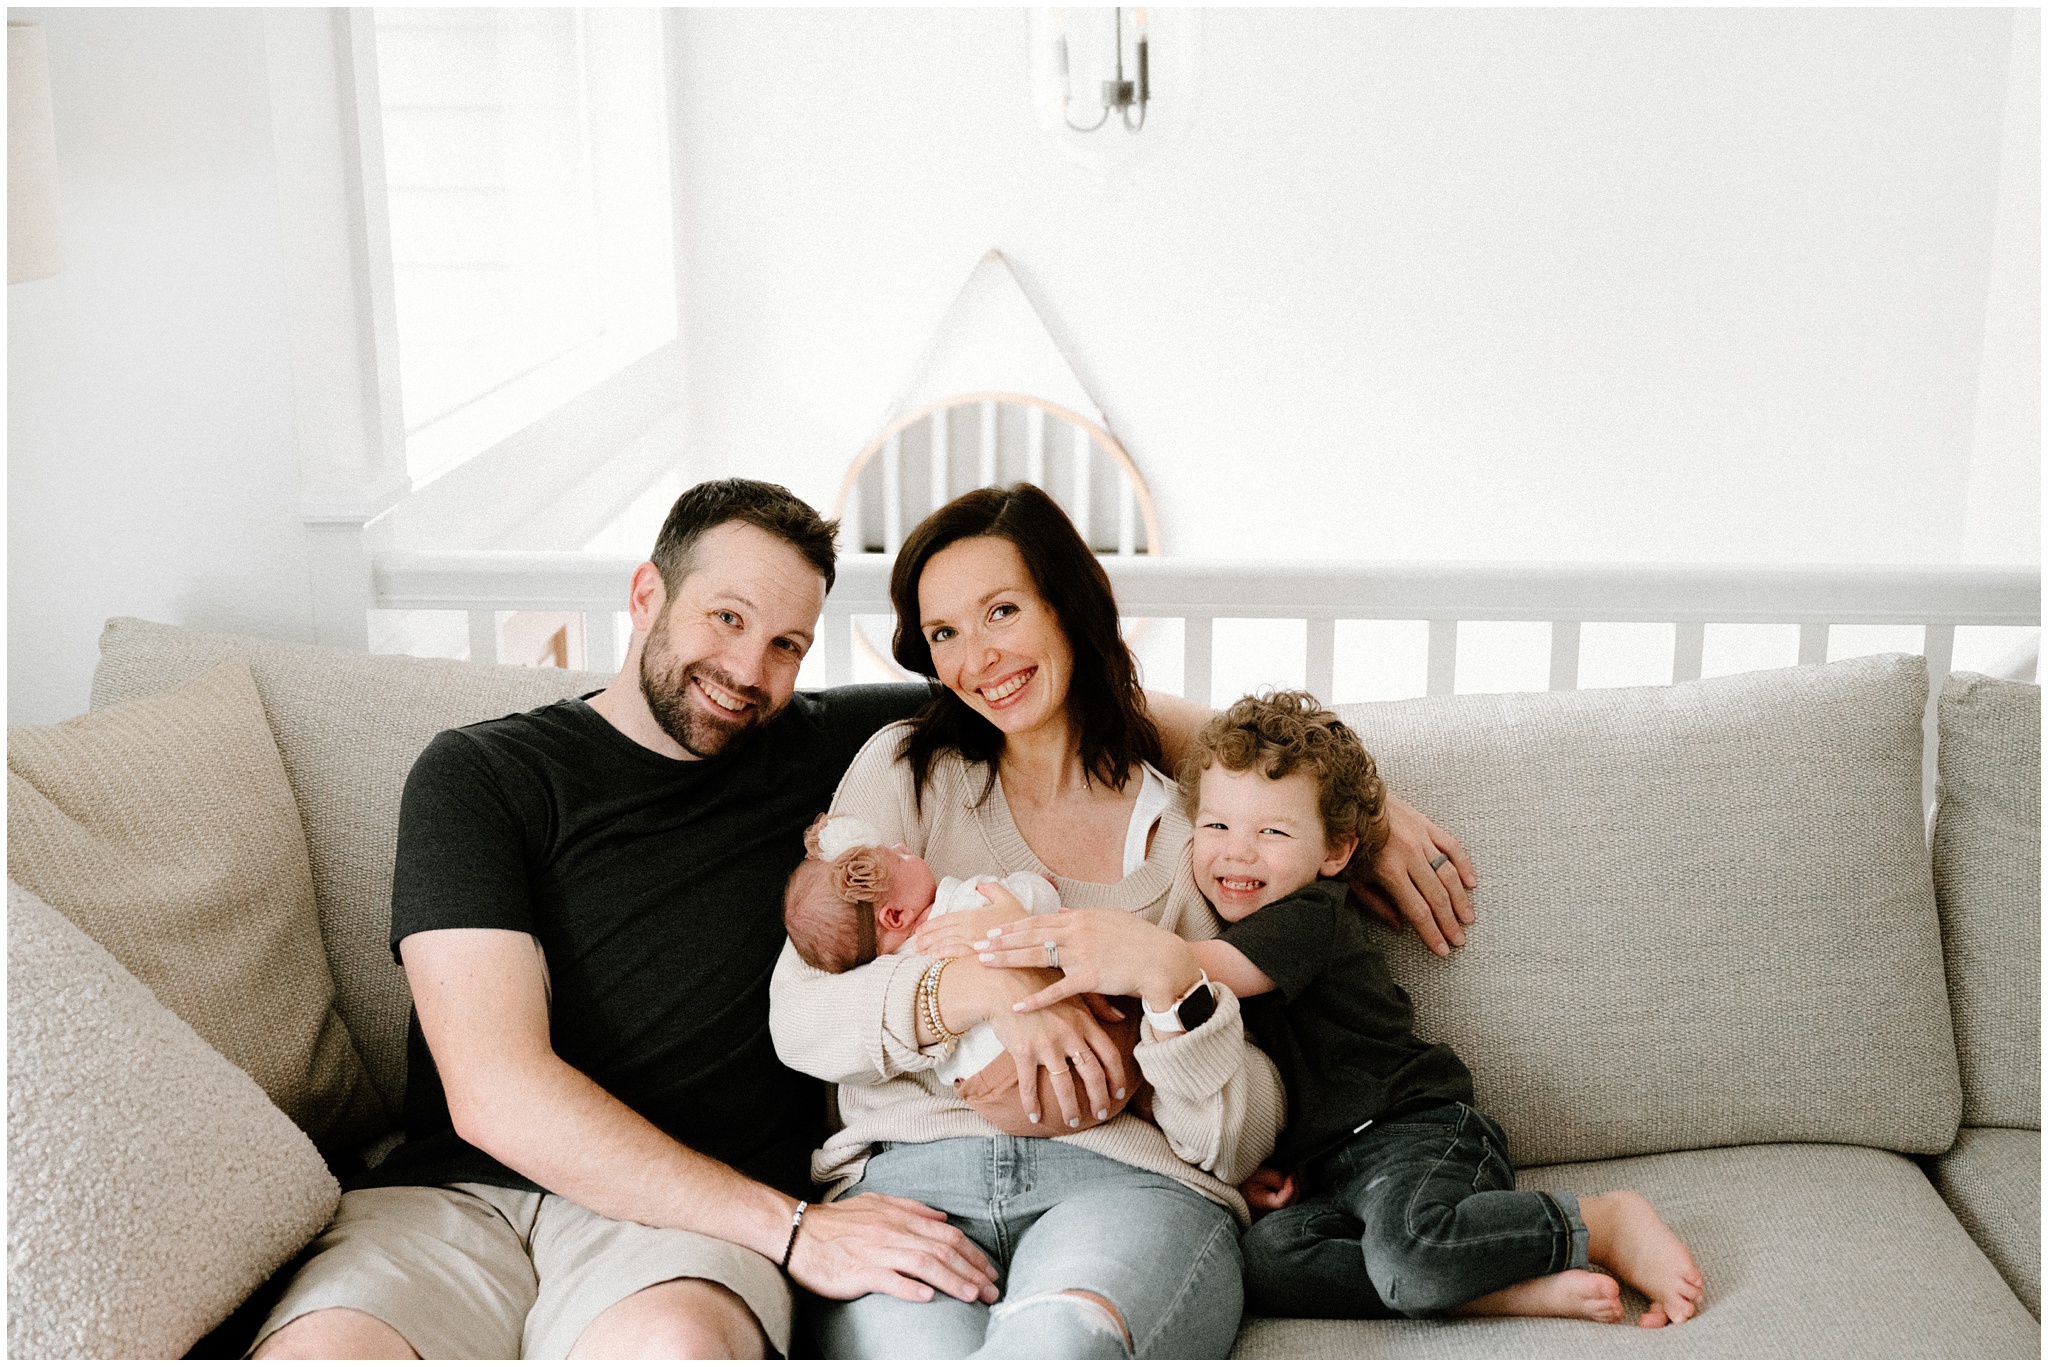 Family portrait on couch during Woodinville newborn session. Photo by Meg Newton Photography.